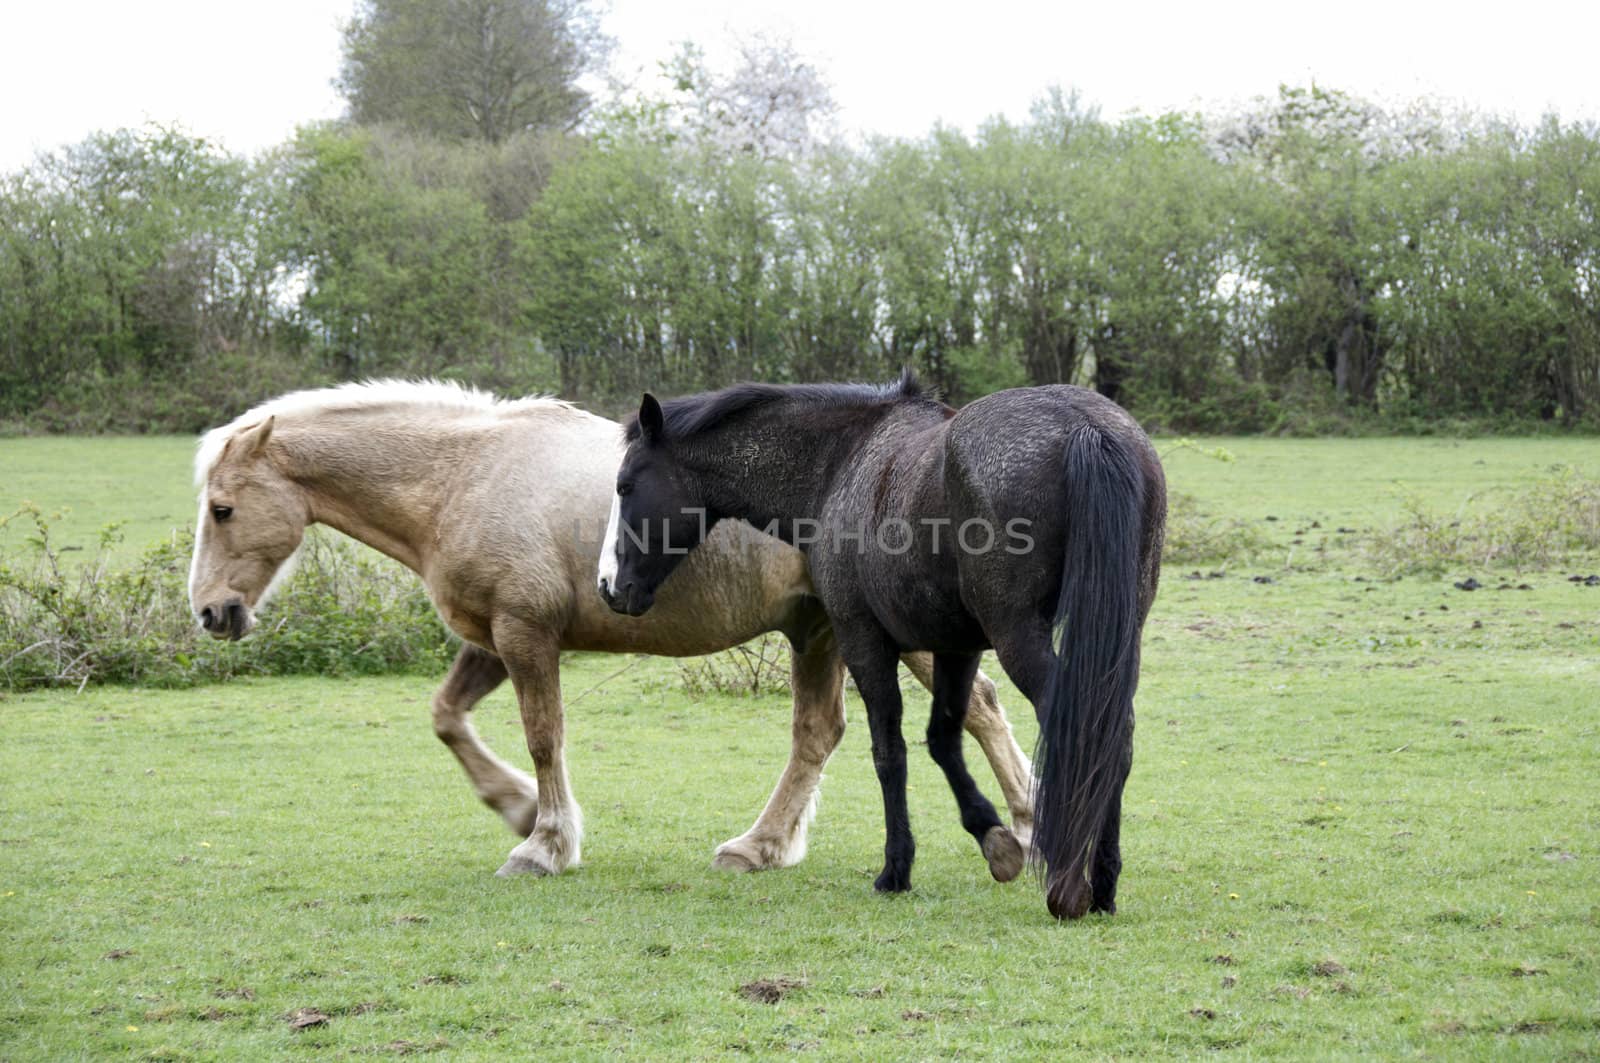 Two horses in a field with trees in the background